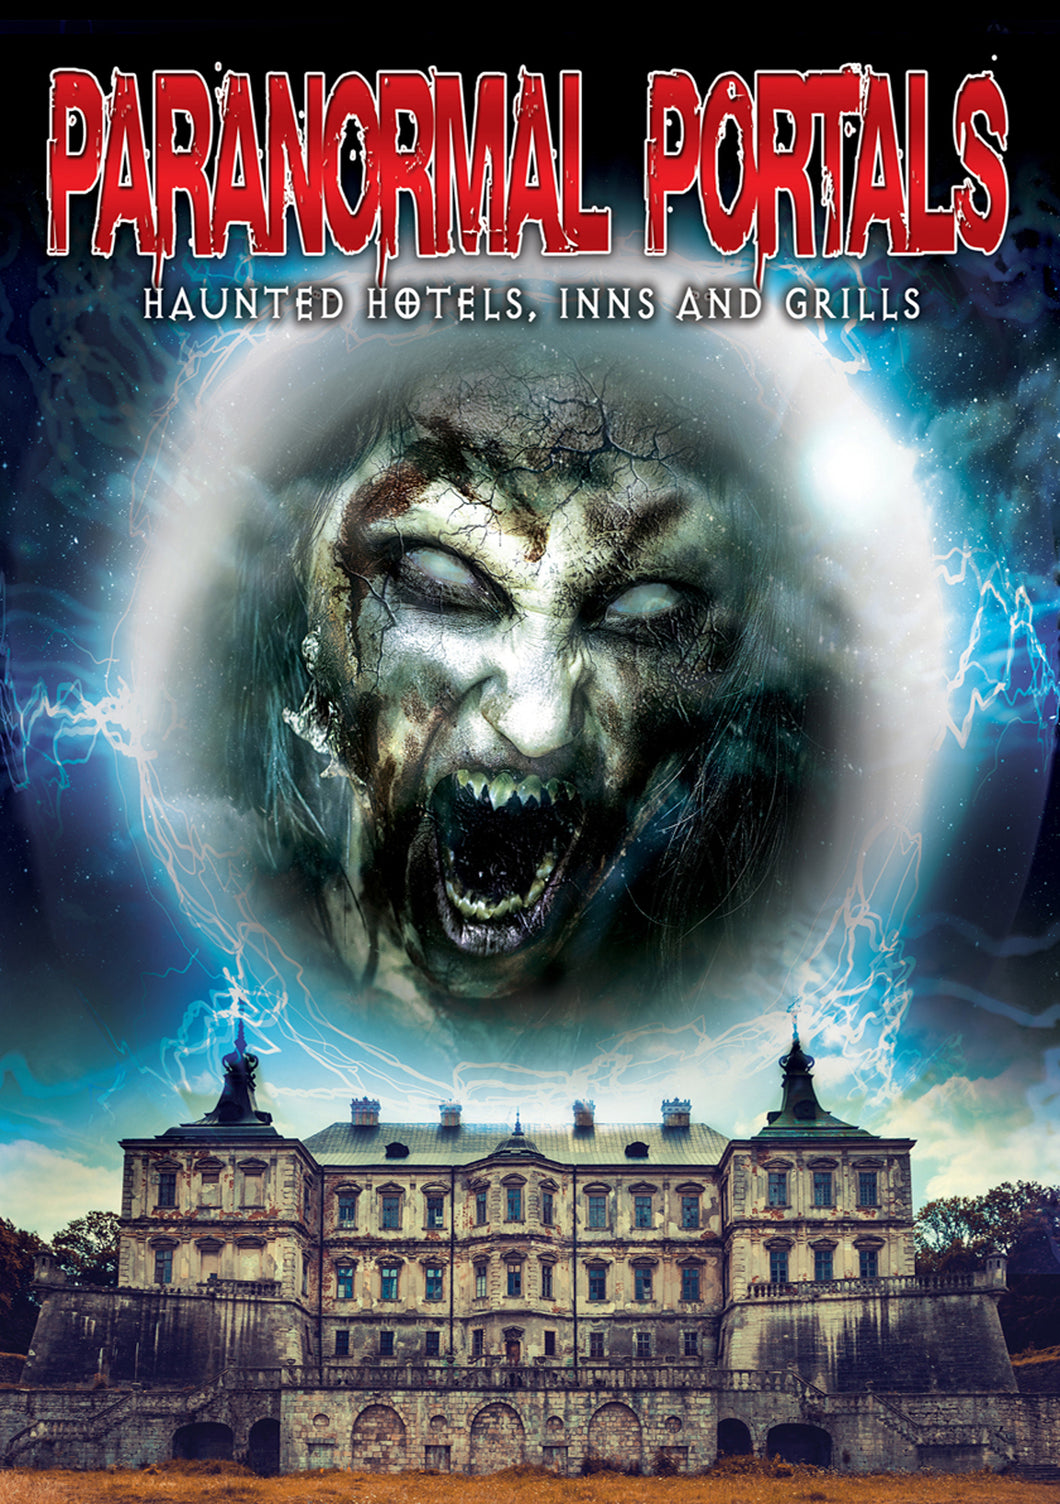 Paranormal Portals: Haunted Hotels, Inns And Grills (DVD)